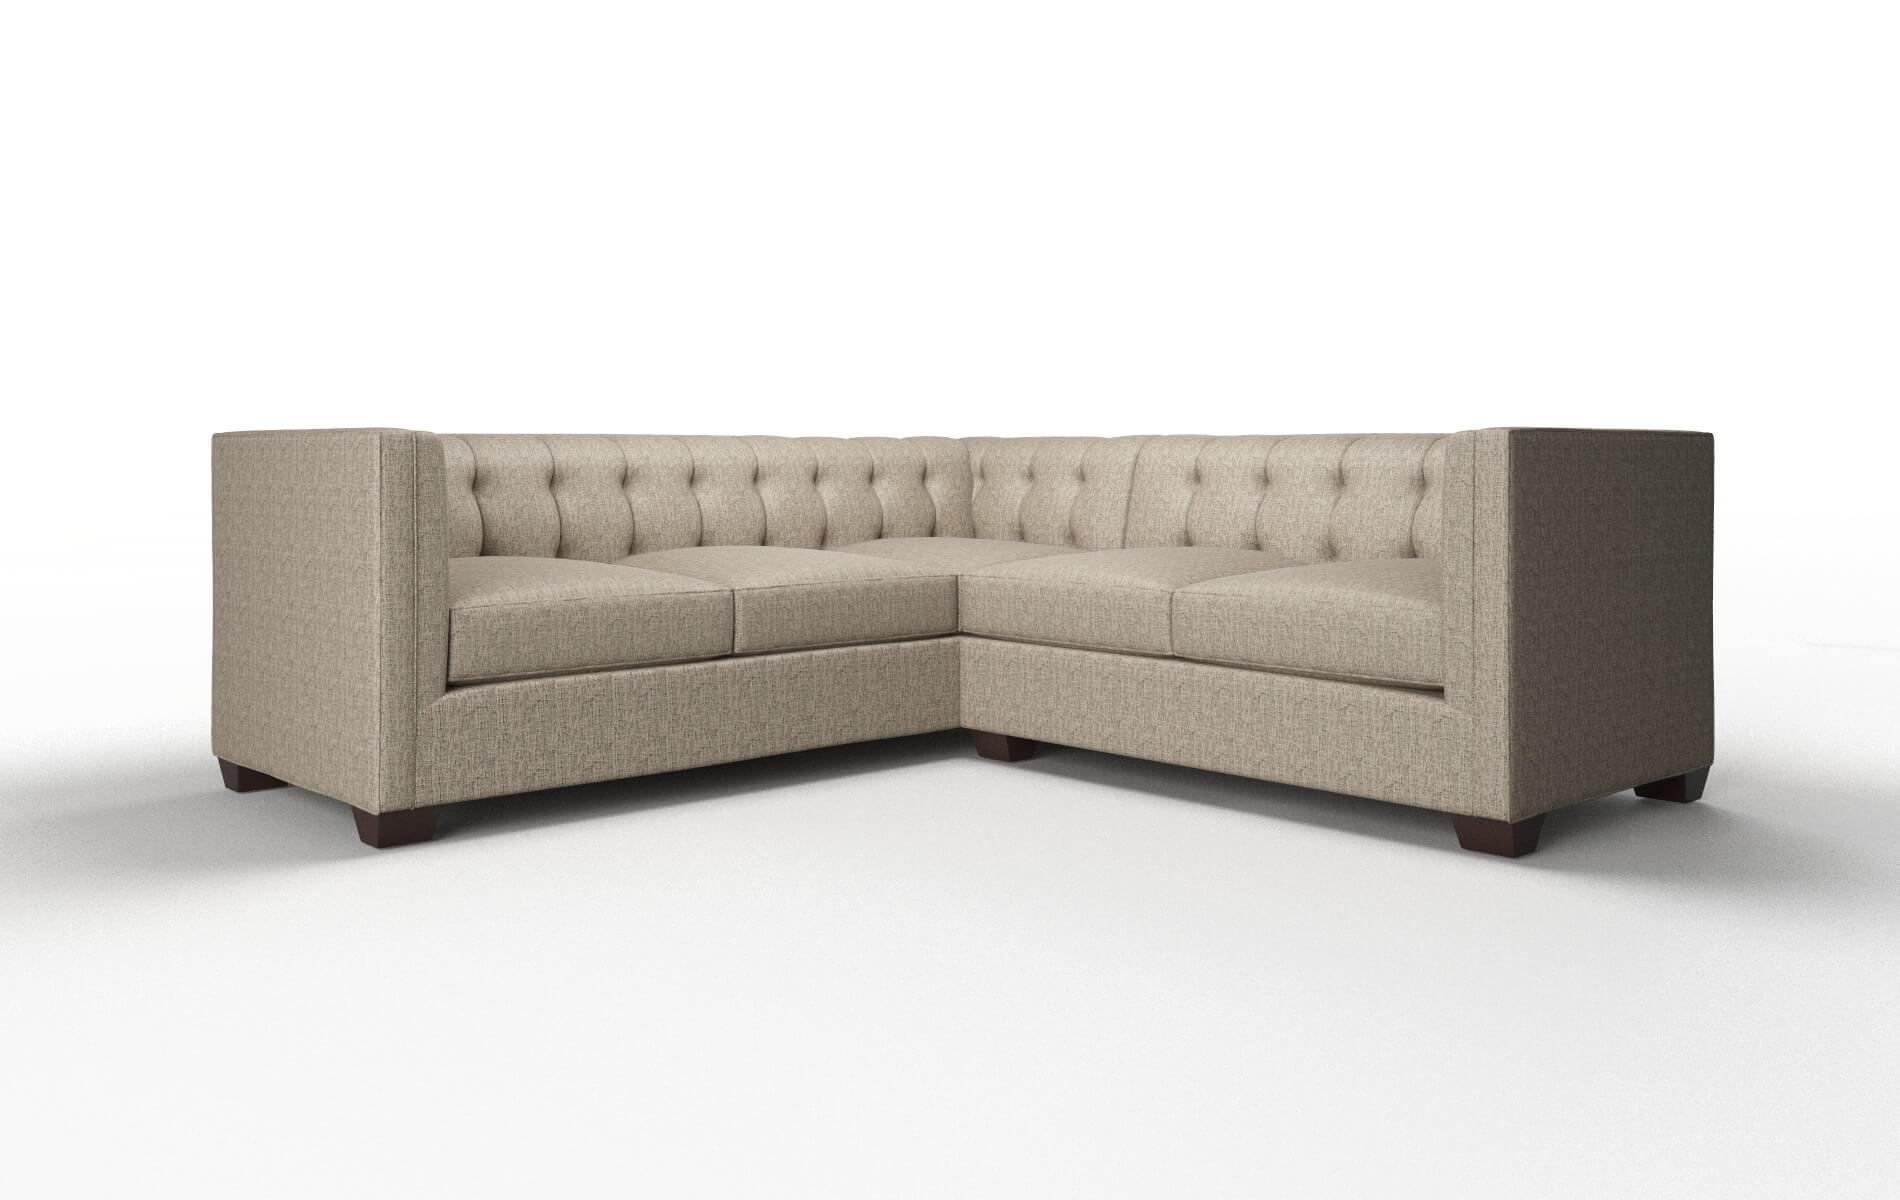 Grant Solifestyle 51 Sectional espresso legs 1